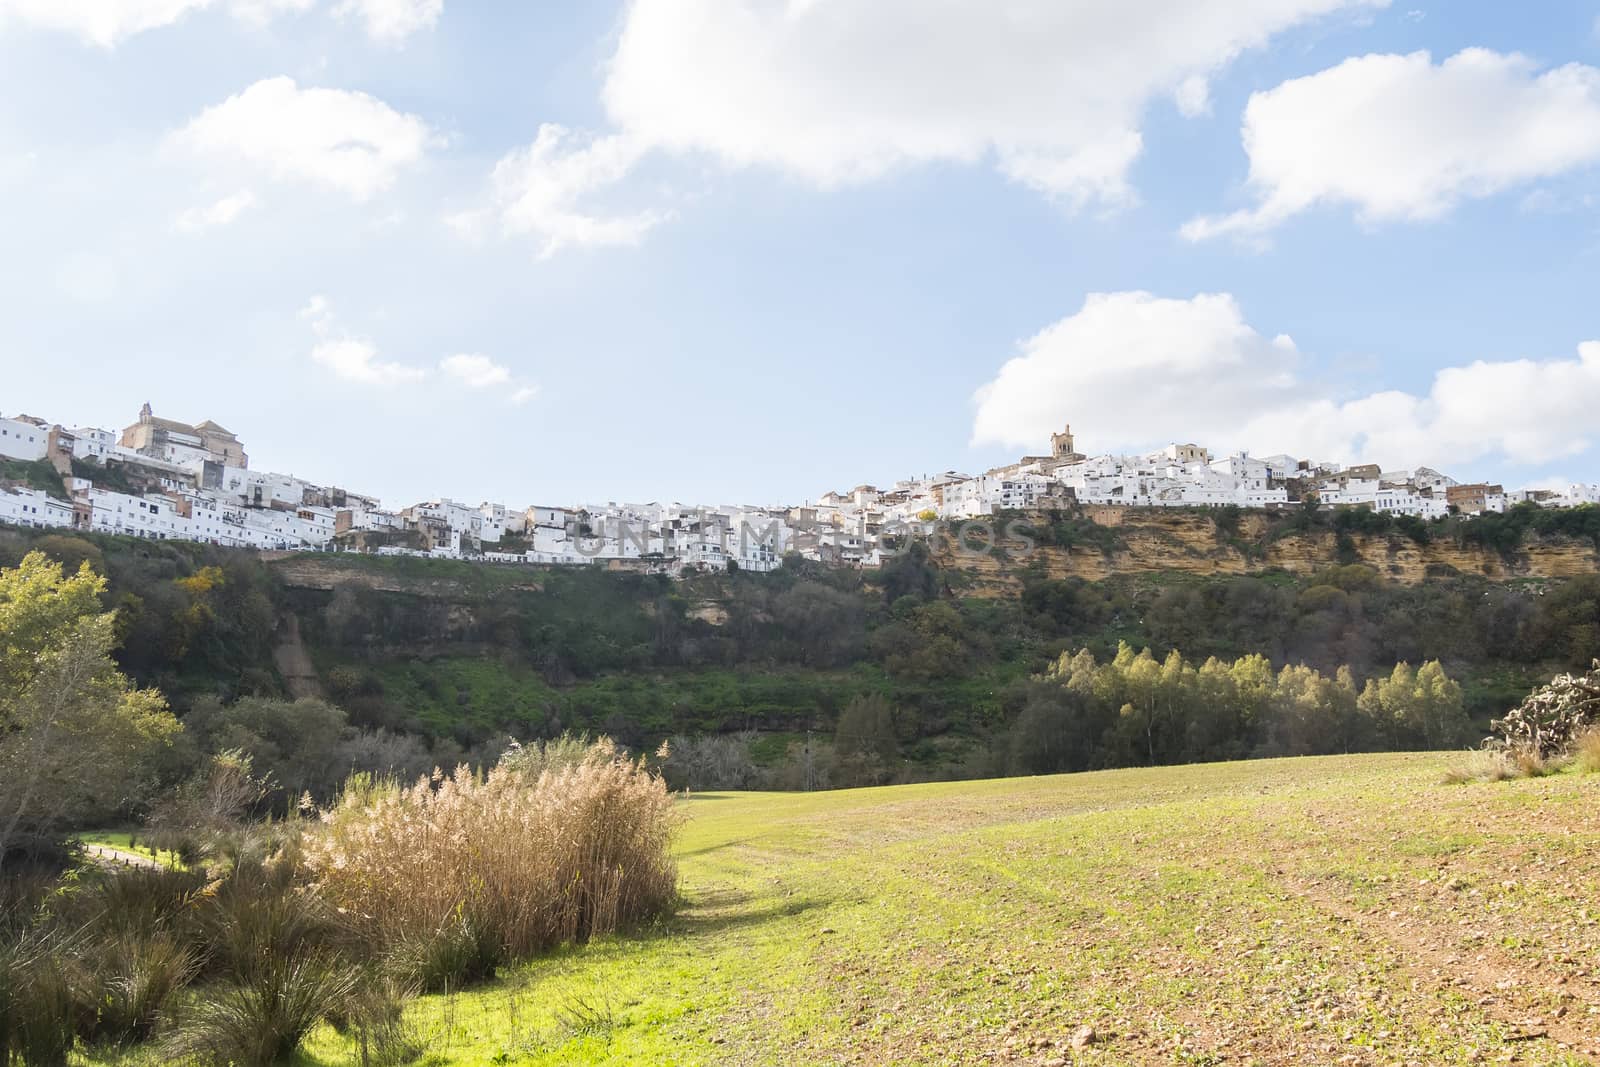 Panoramic of Arcos de la Frontera, white town built on a rock along Guadalete river, in the province of Cadiz, Spain